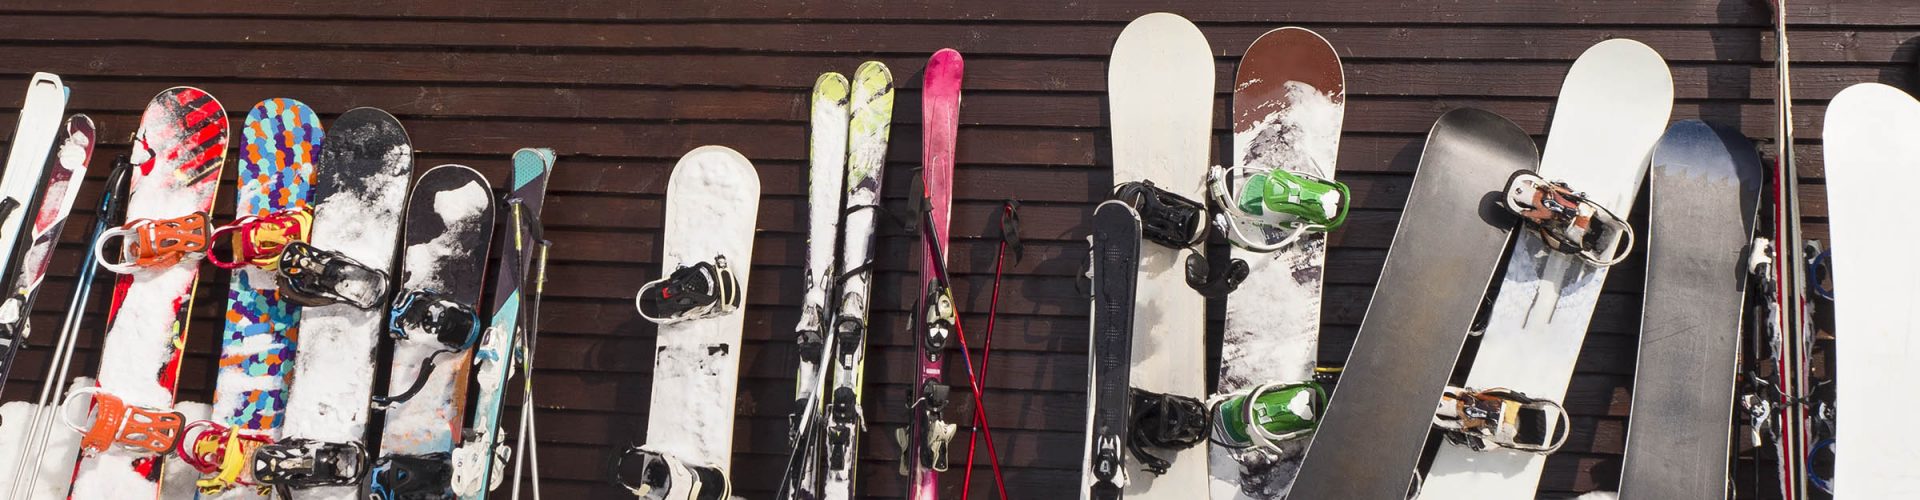 A row of skis and snowboards